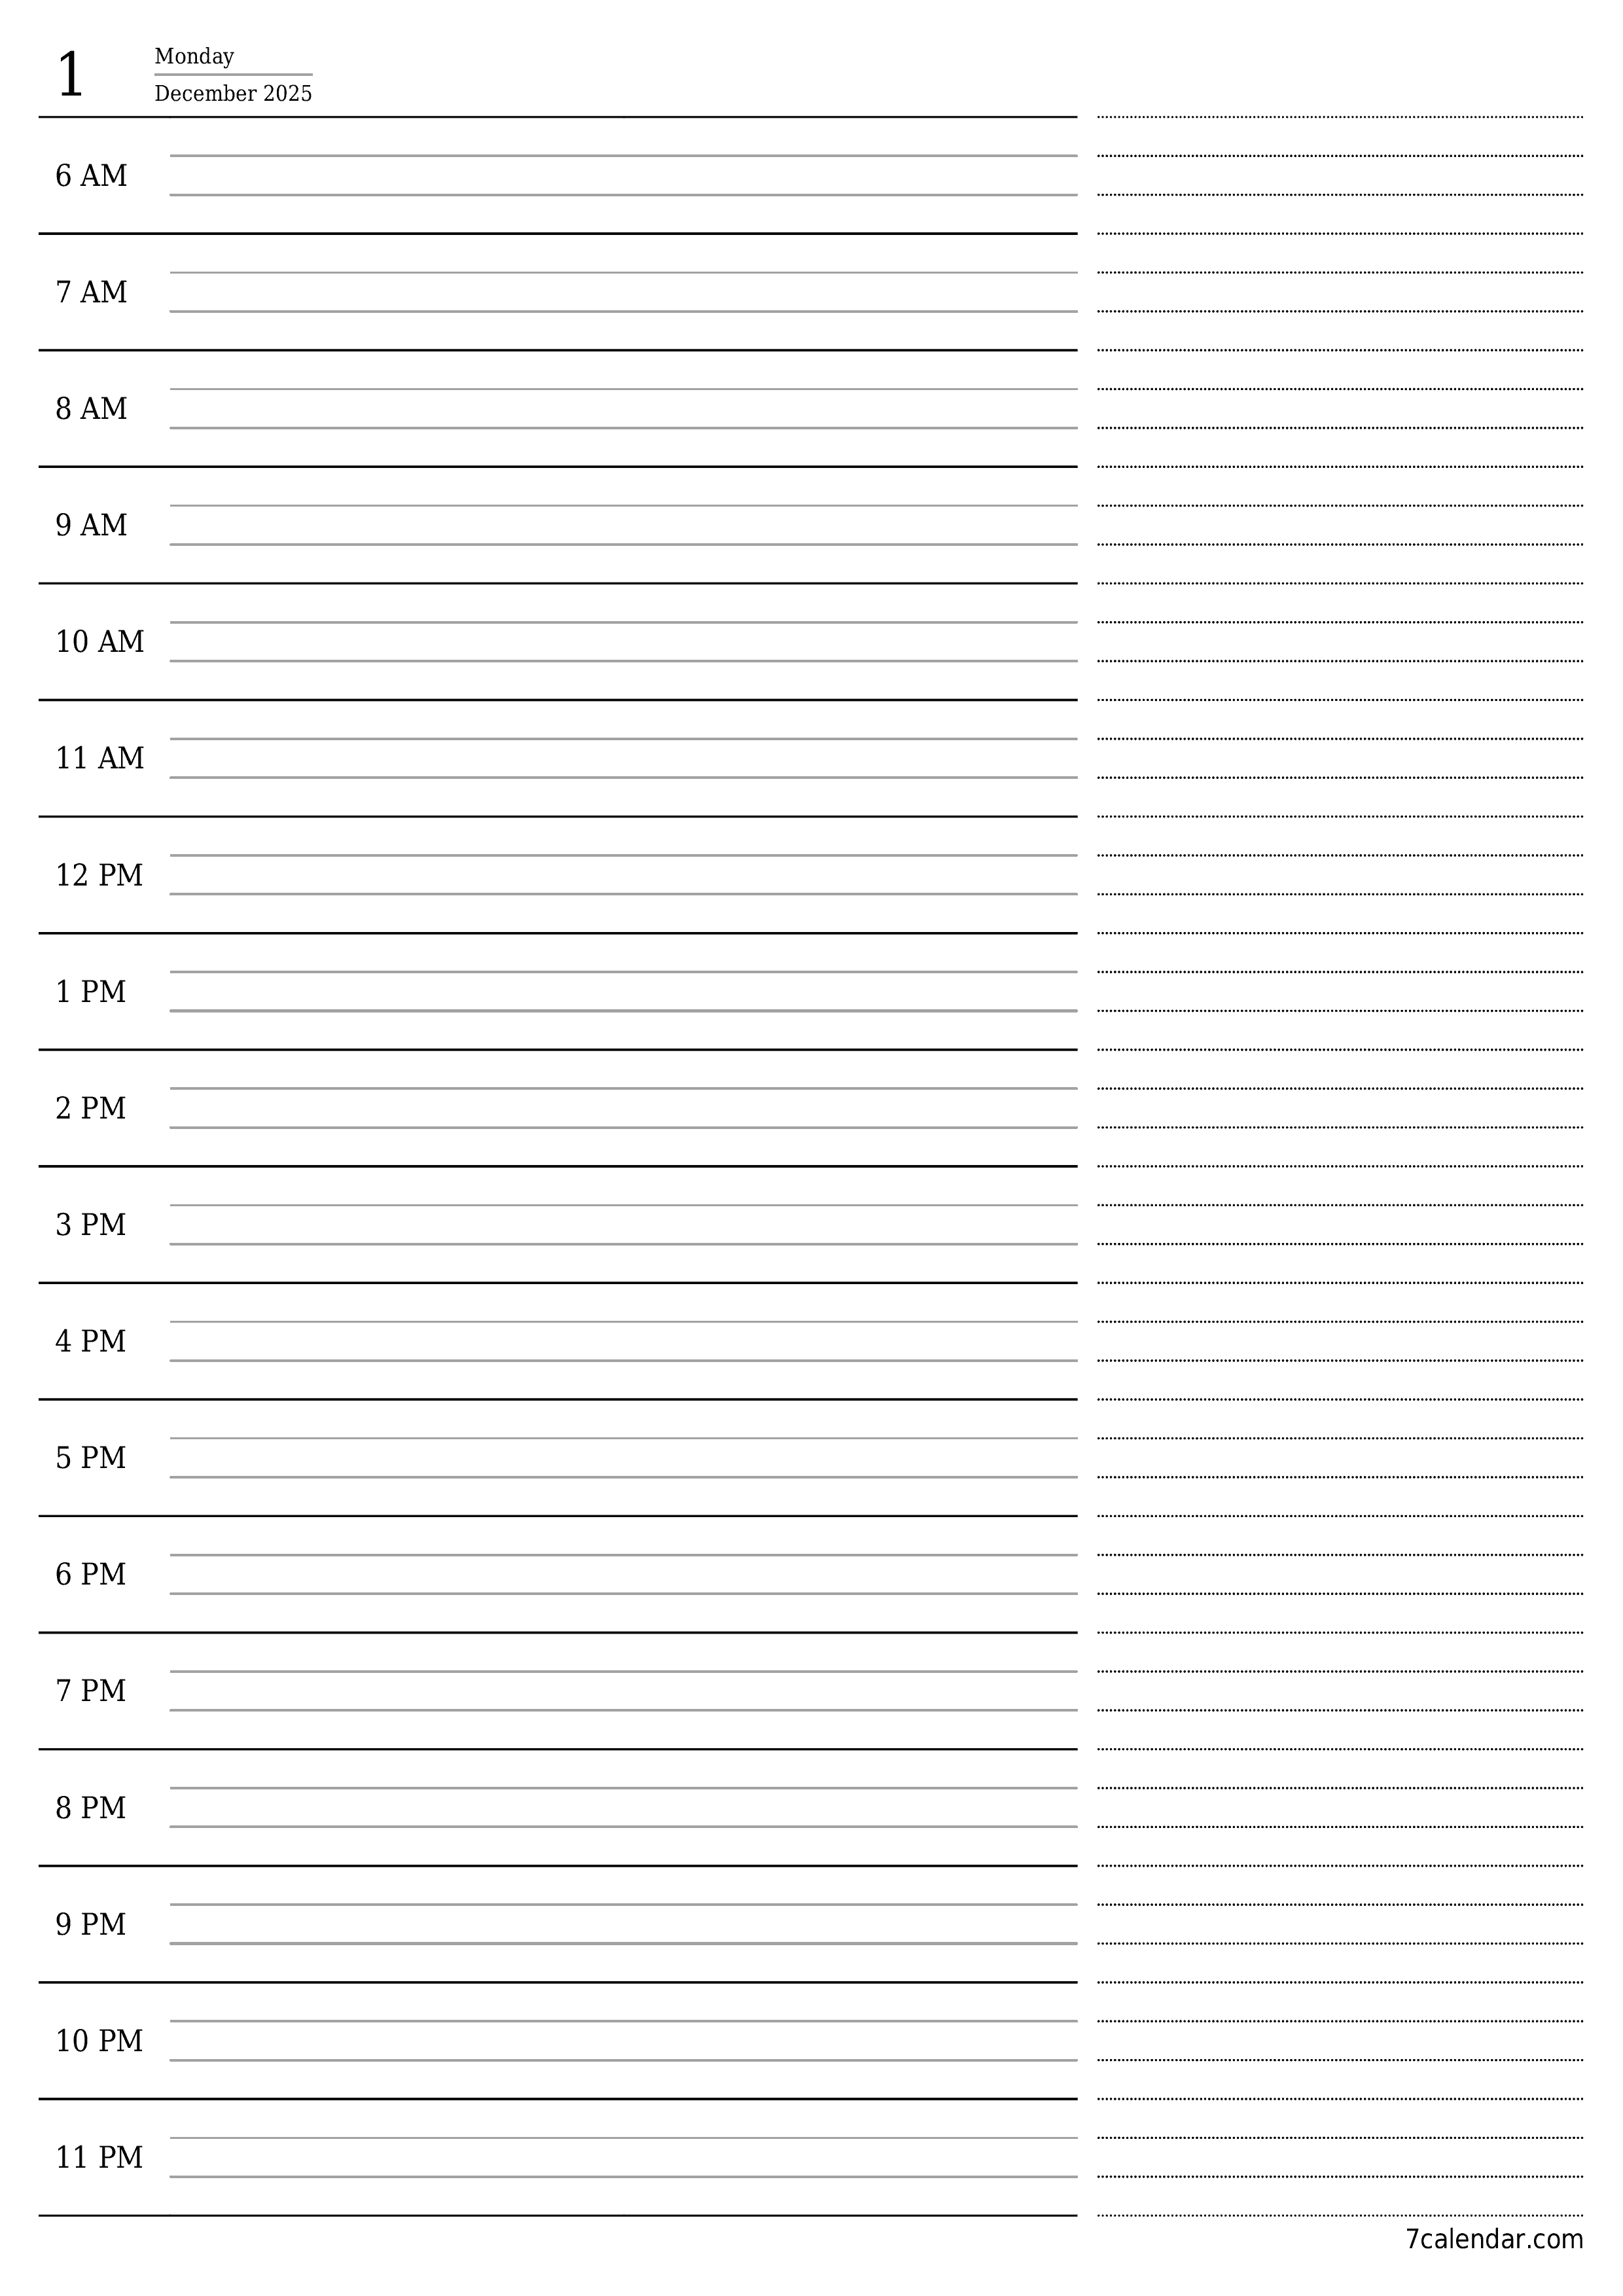 Blank daily printable calendar and planner for day December 2025 with notes, save and print to PDF PNG English